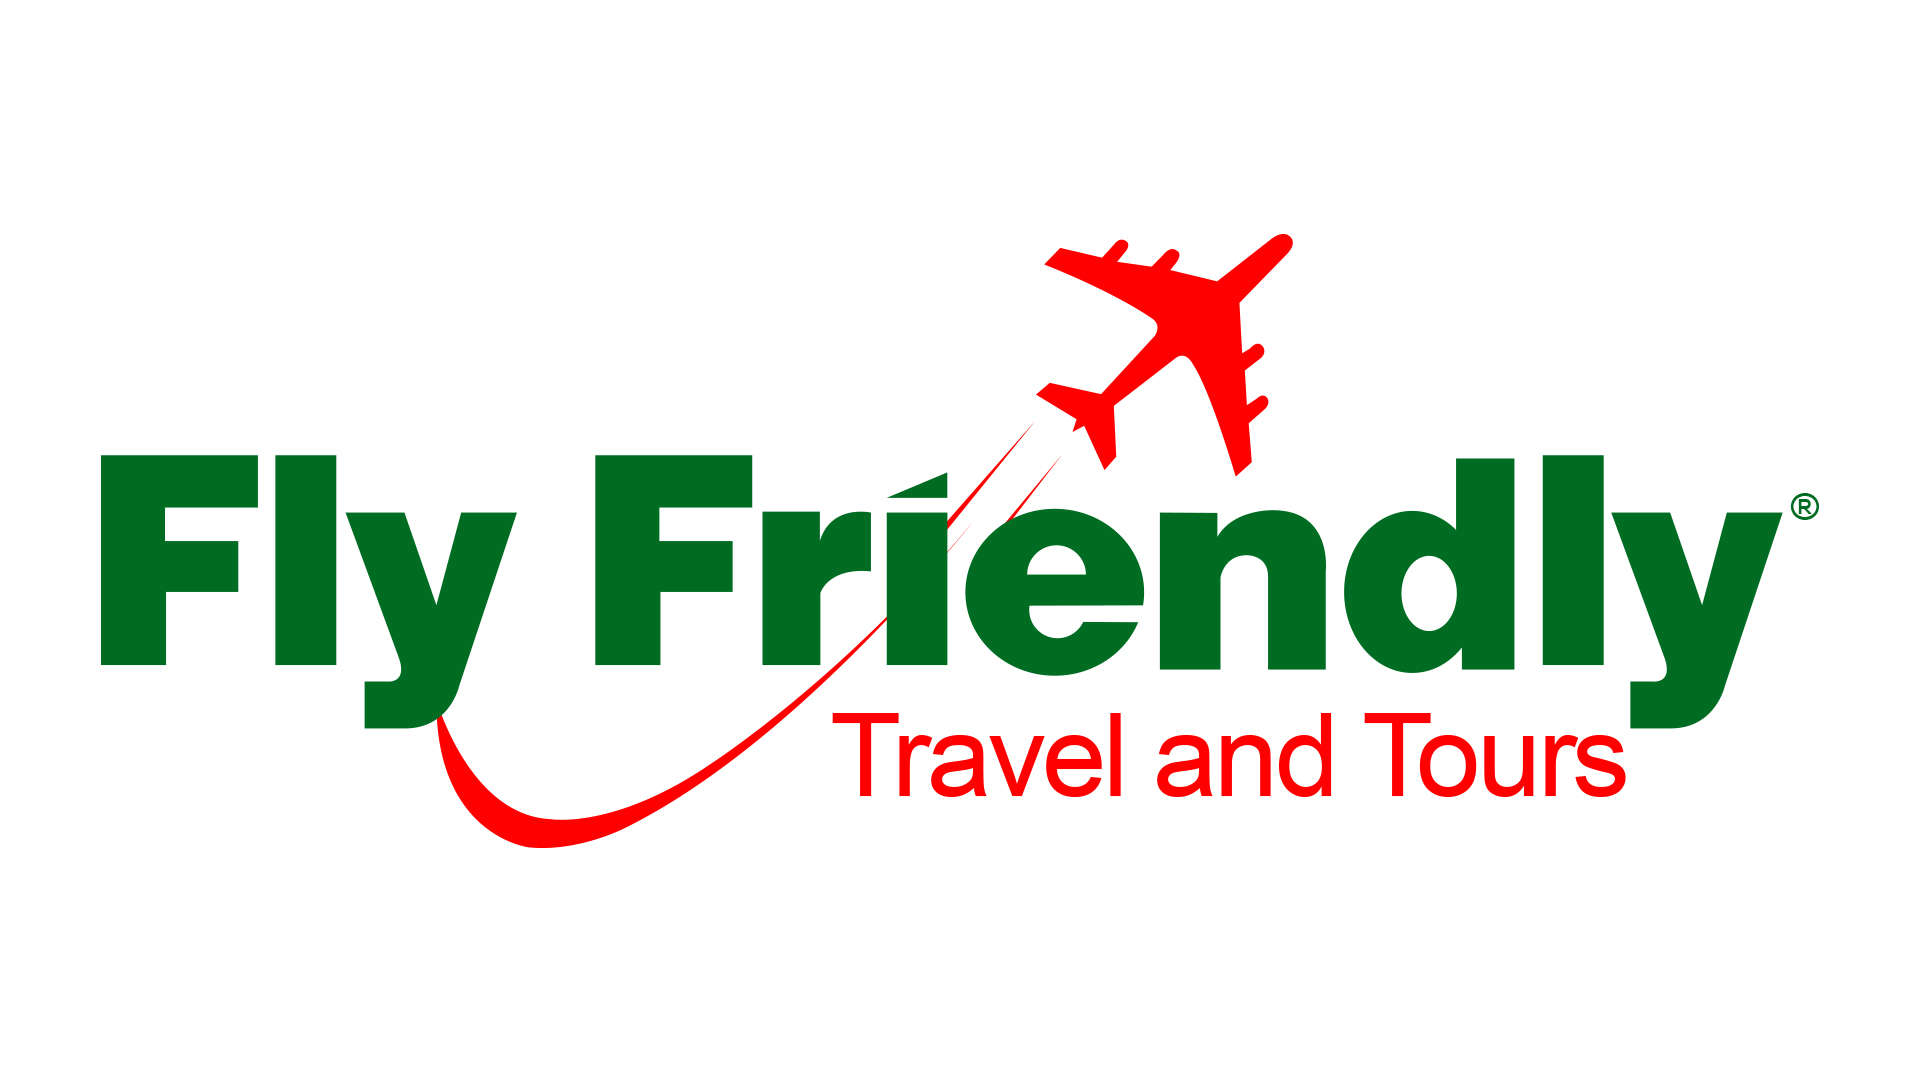 fly mode travel and tourism